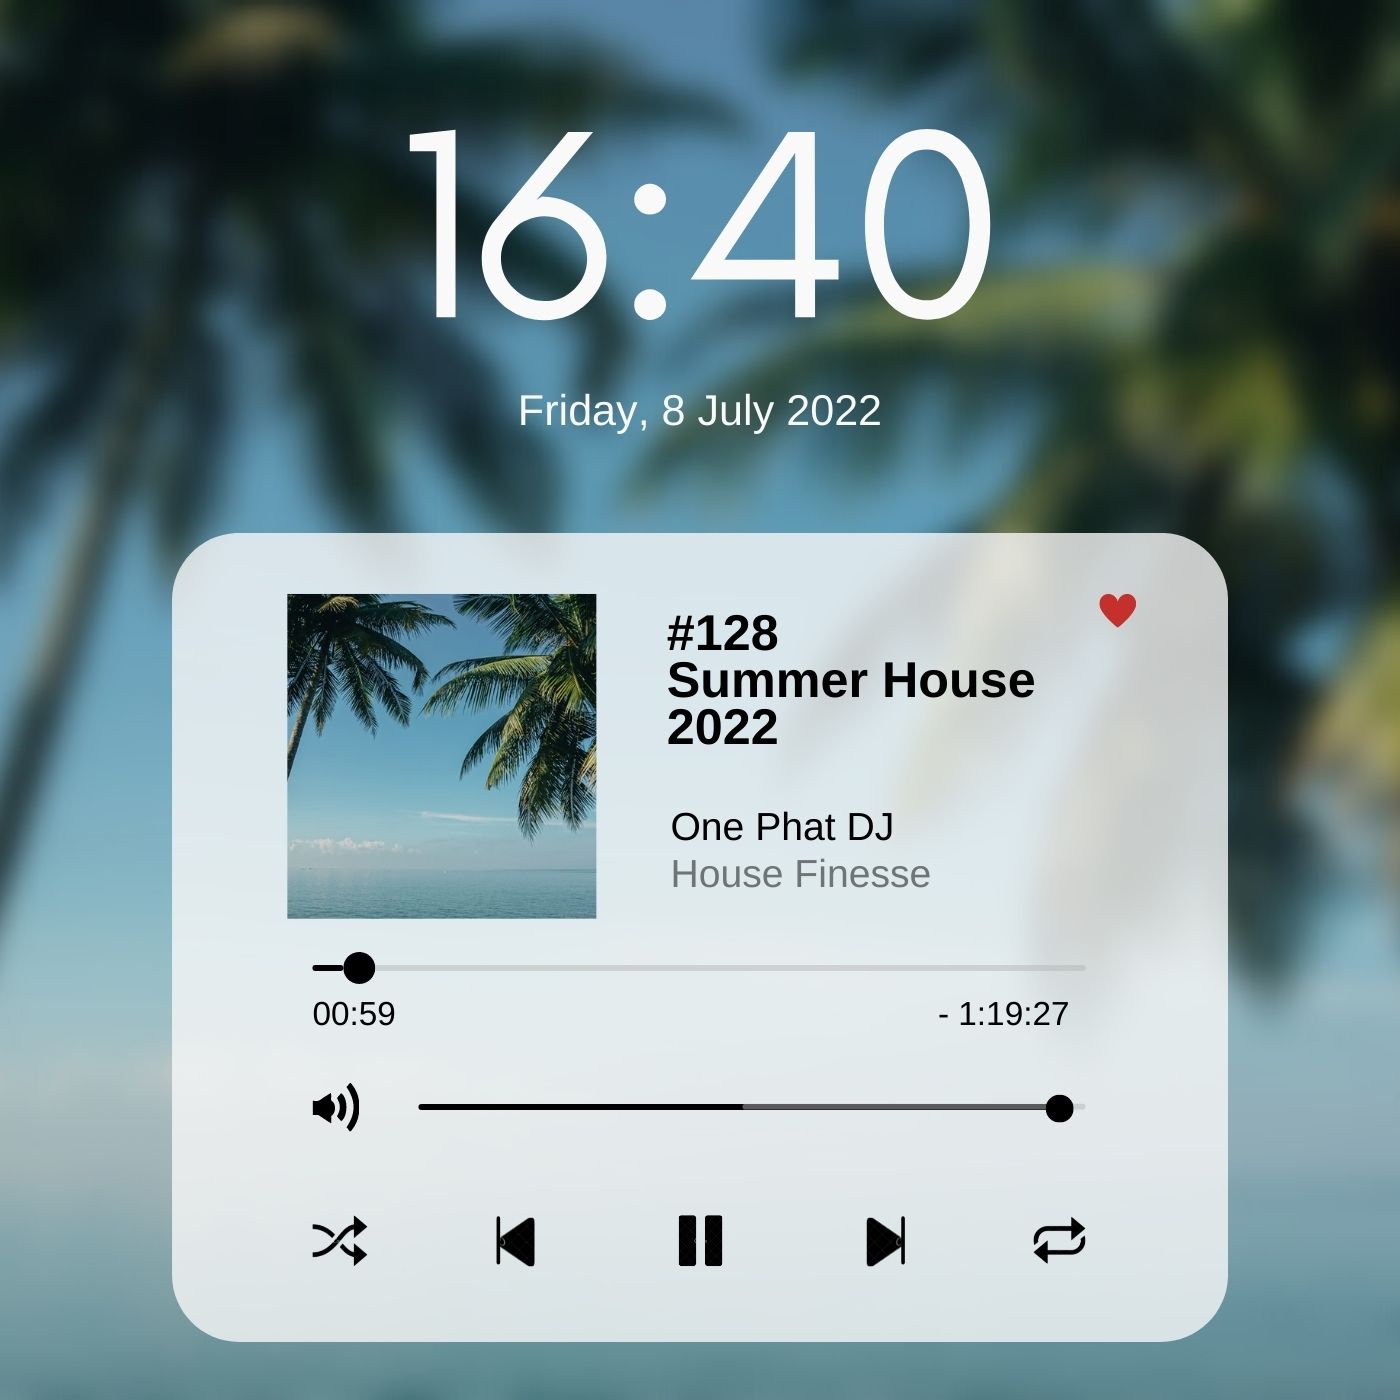 Summer House 2022 with One Phat DJ